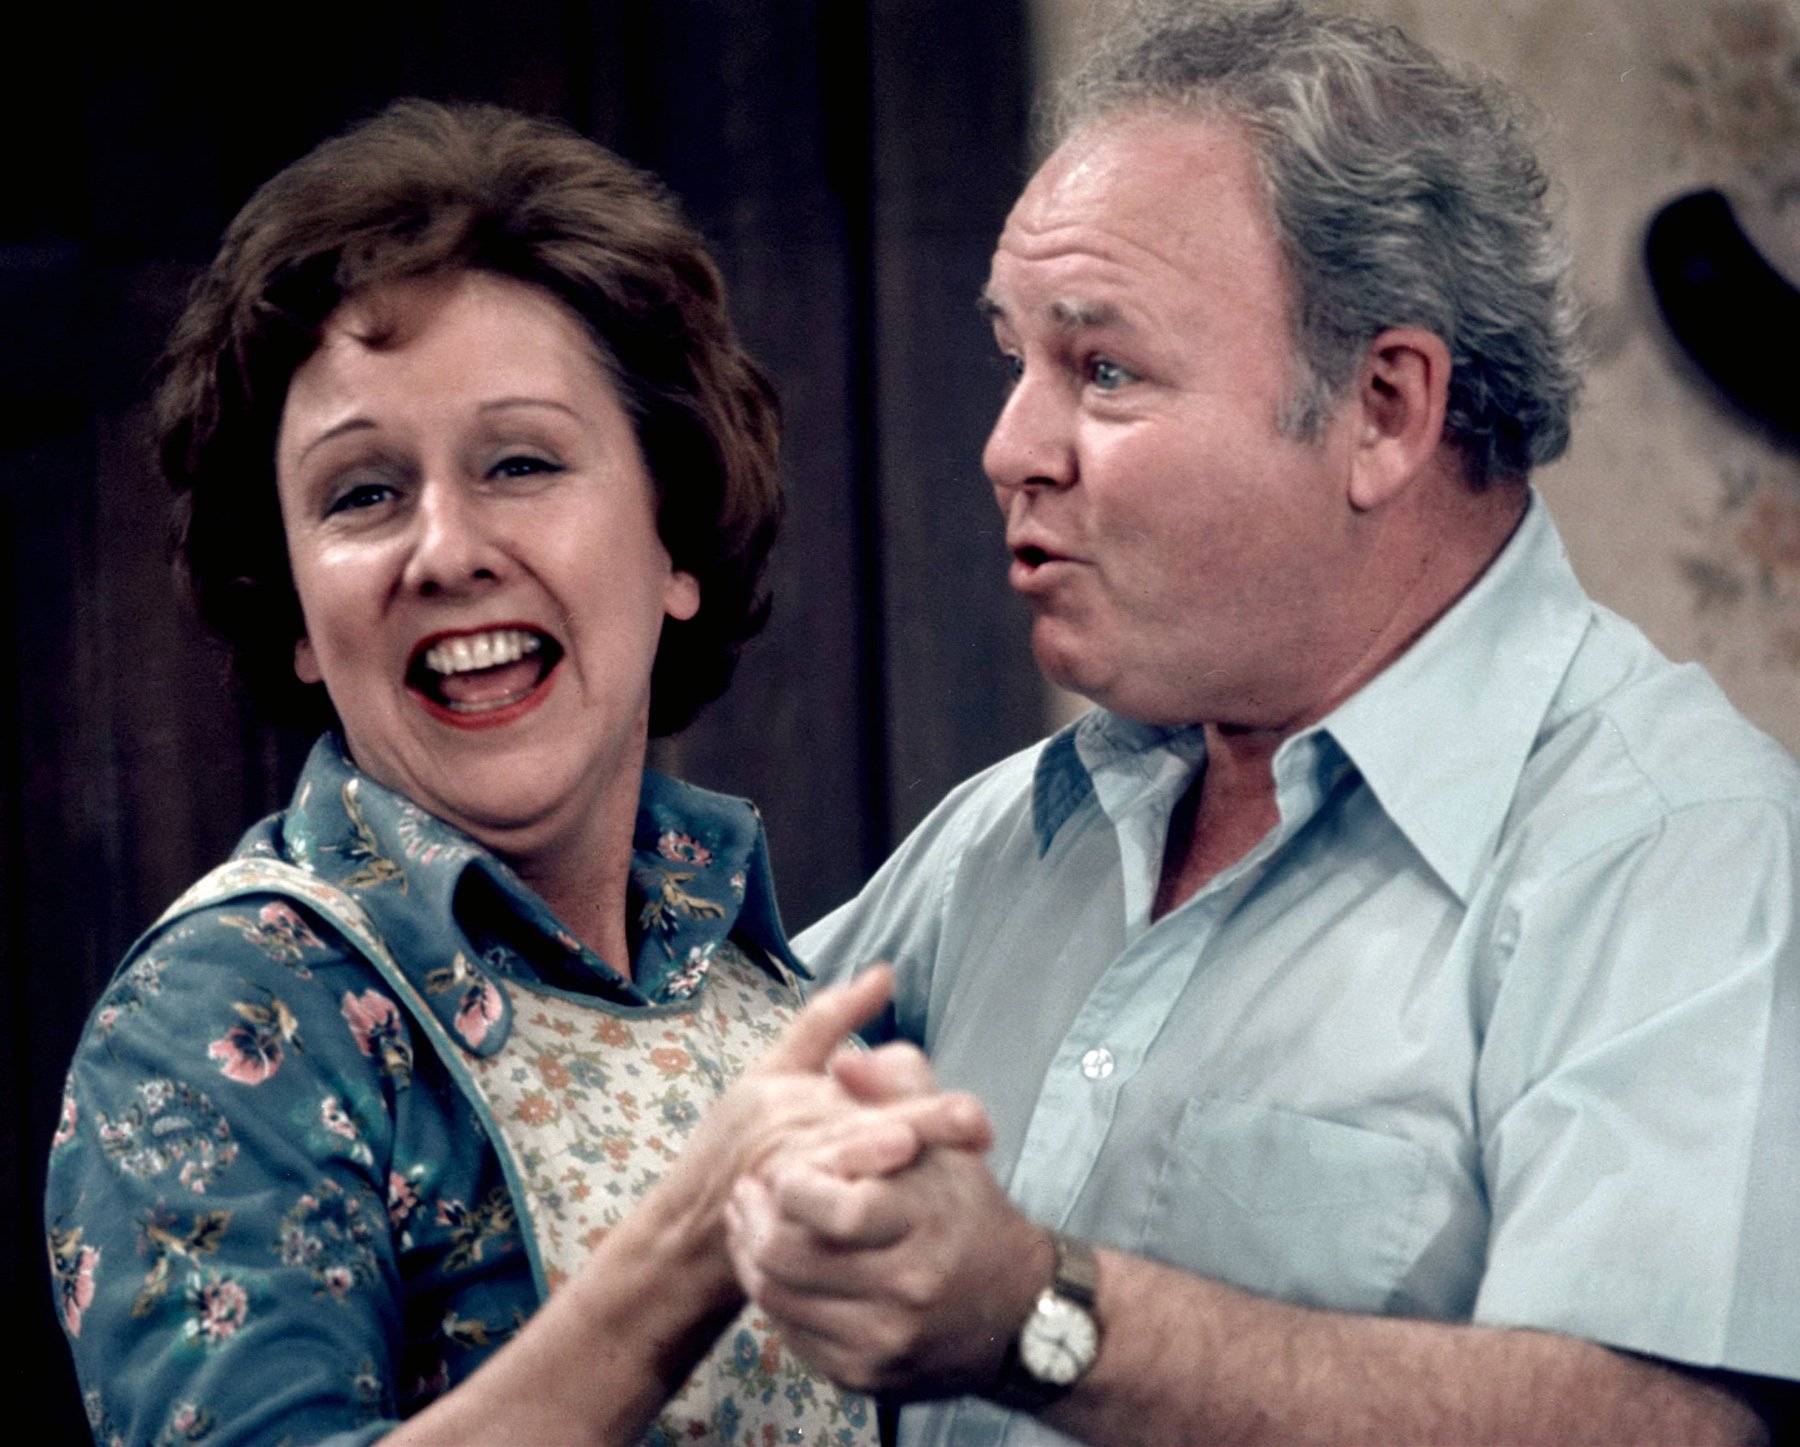 Jean Stapleton (as Edith Bunker) and Carroll O'Connor (as Archie Bunker) in 1973 | CBS via Getty Images